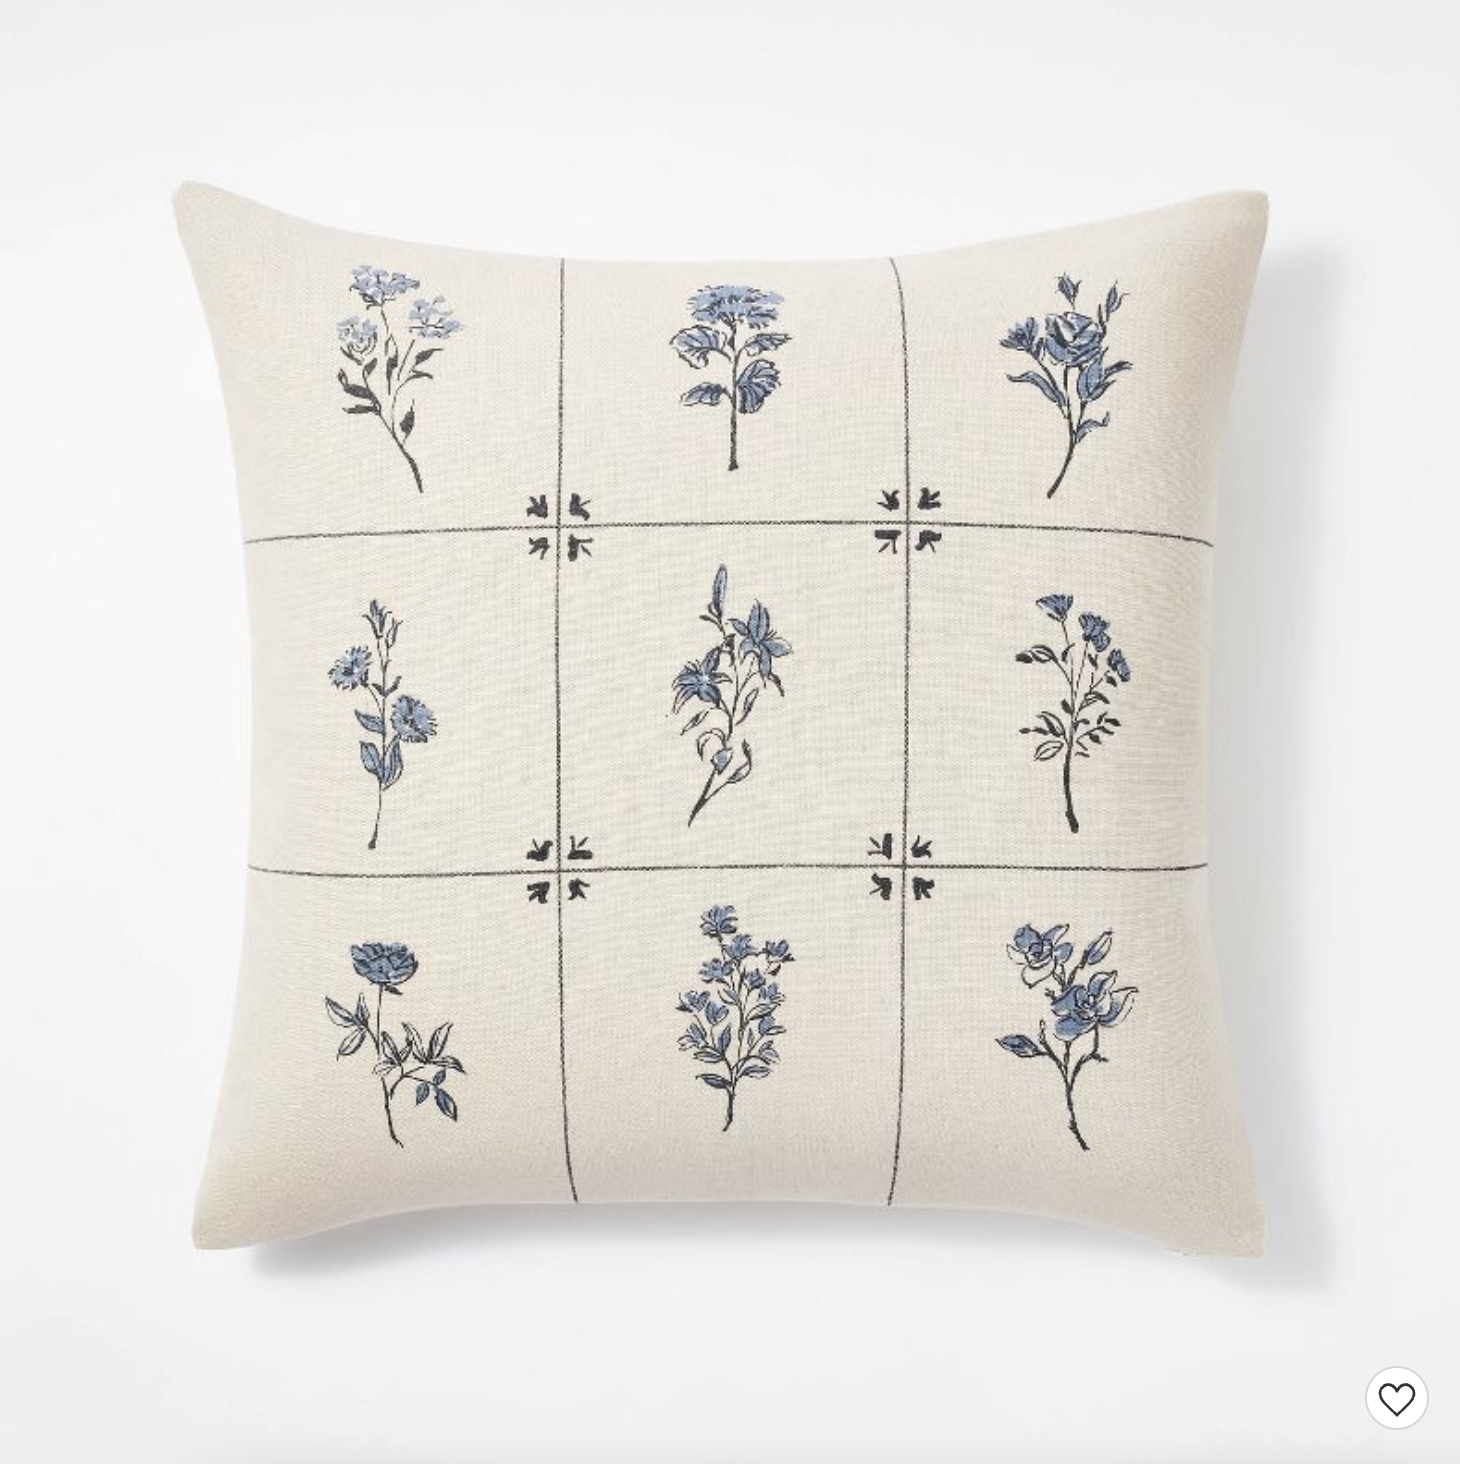 Throw pillow with design split into nine quadrants featuring different flowers